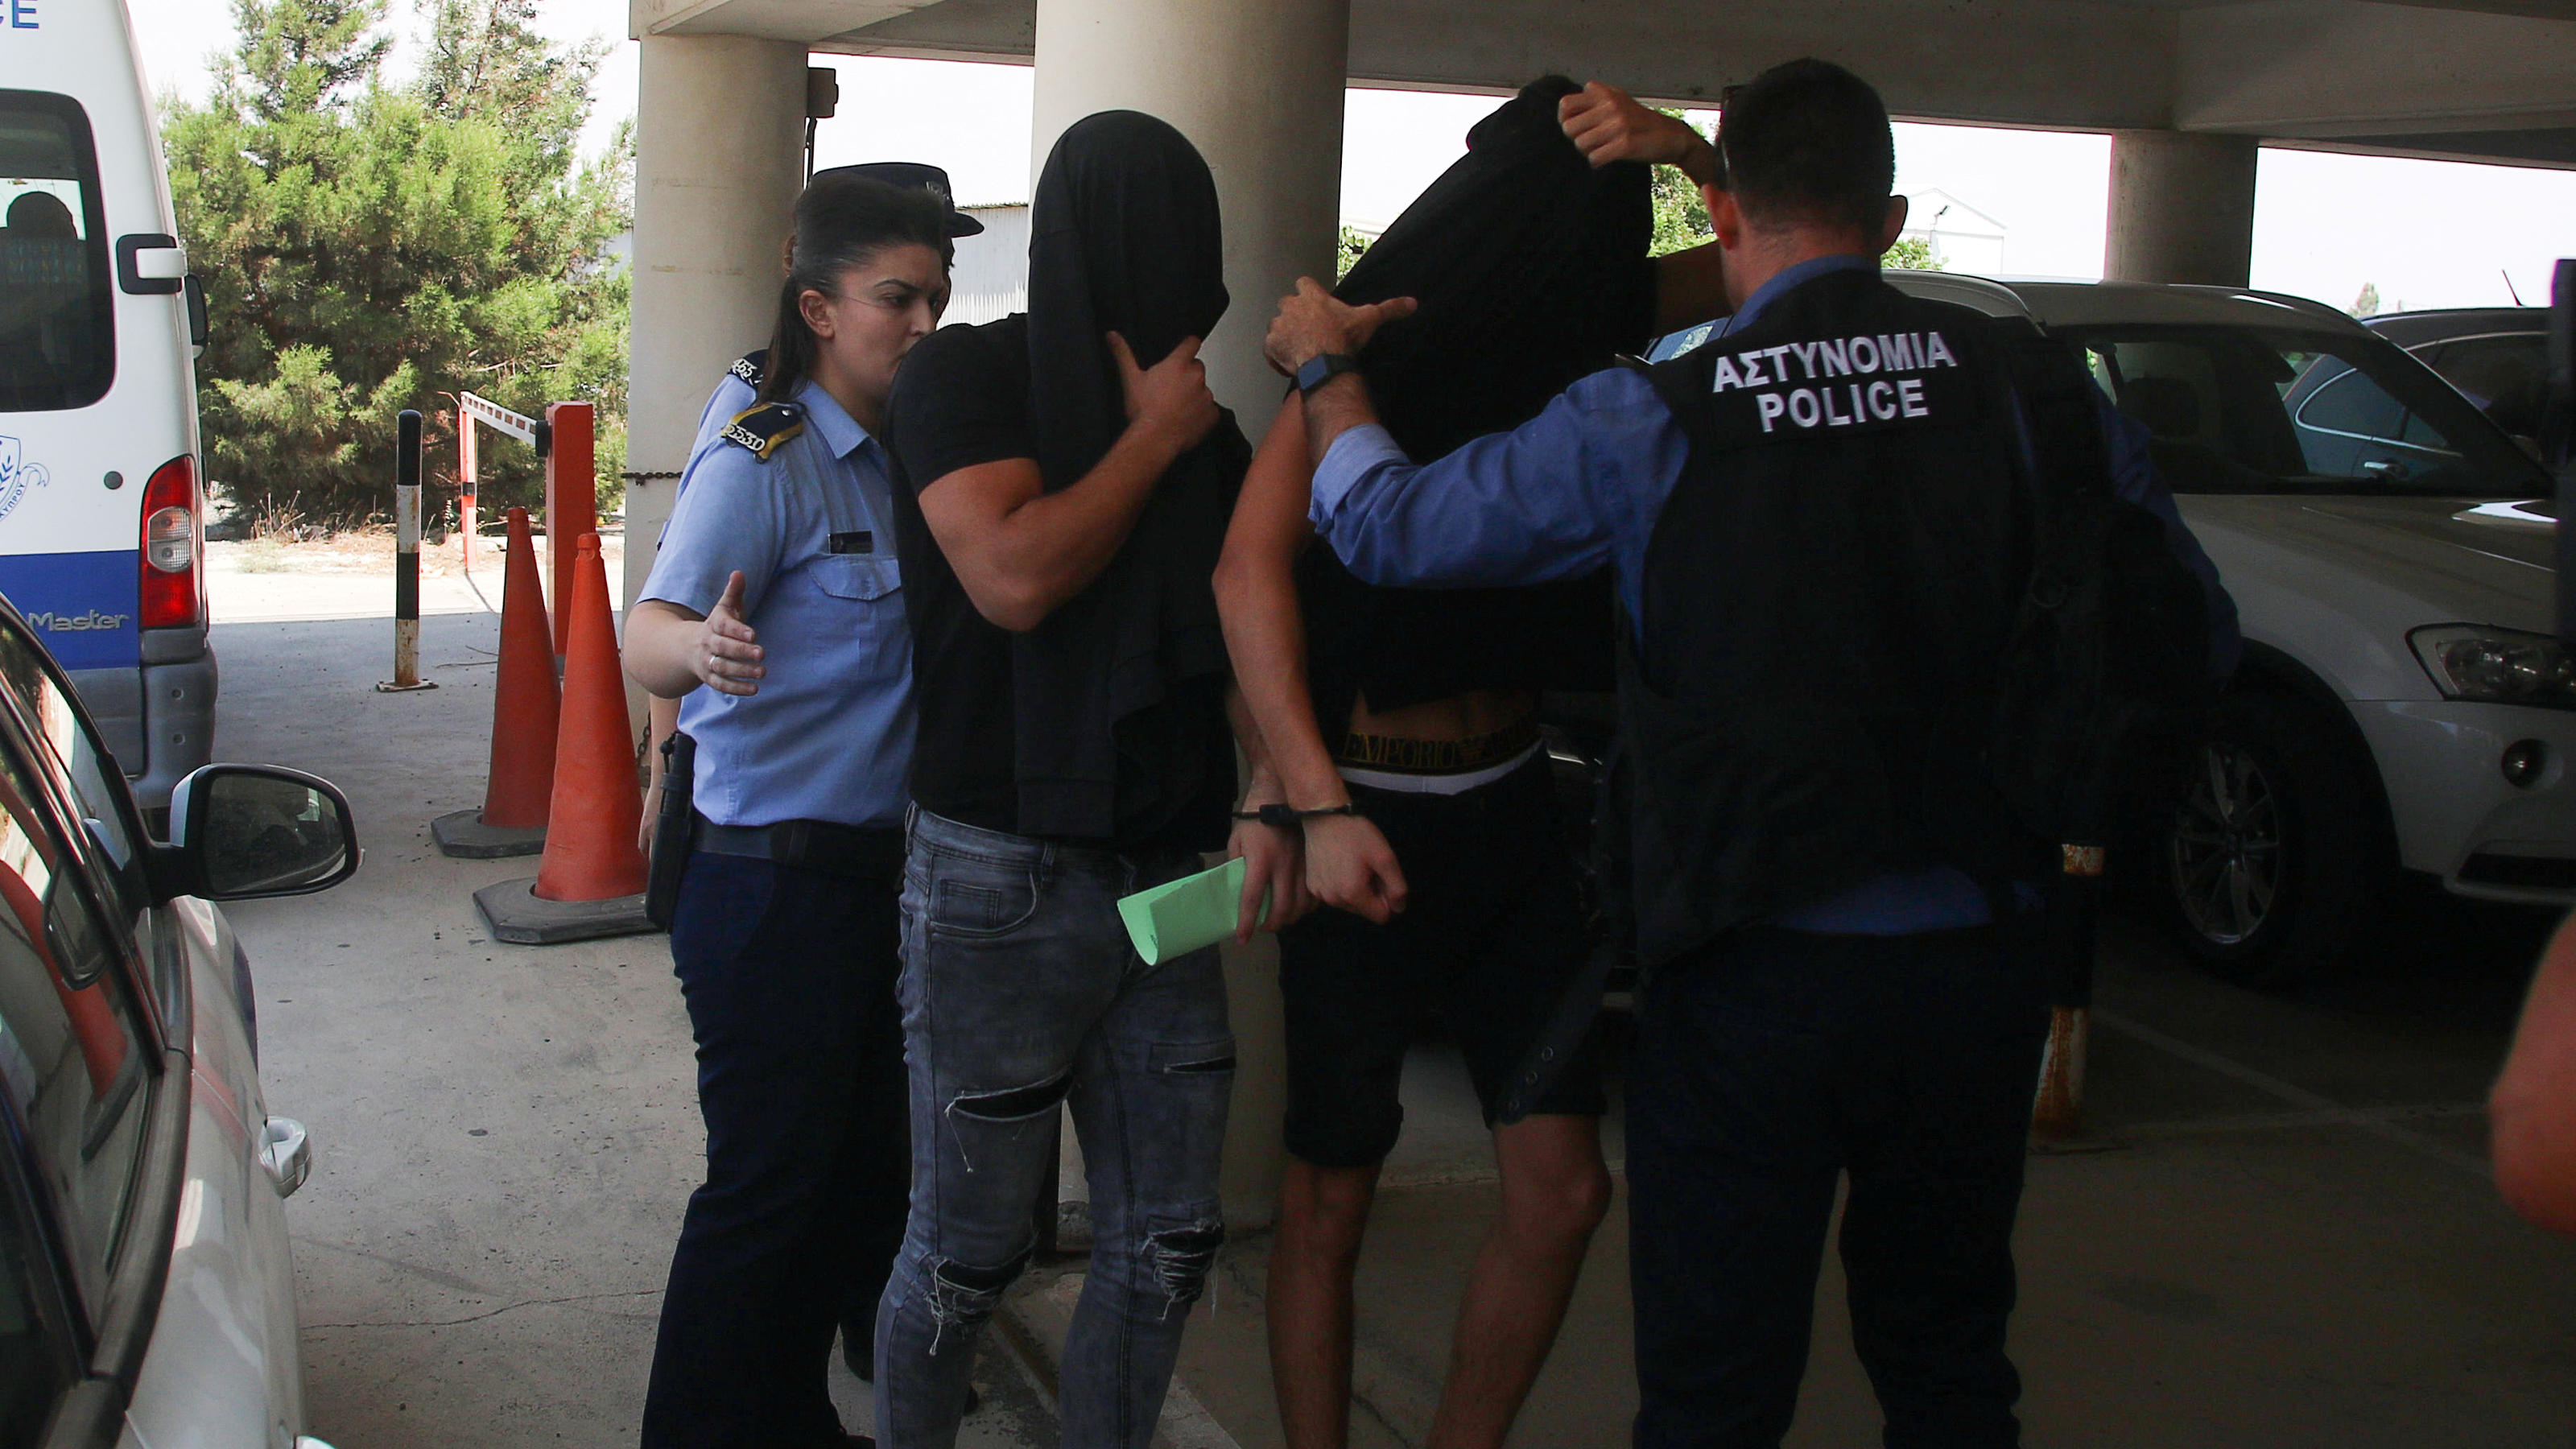 Israeli tourists, arrested over the alleged rape of a British tourist in the resort town of Ayia Napa, arrive to appear before a magistrate for a remand hearing in the Famagusta courthouse in Paralimni, Cyprus July 18, 2019. REUTERS/Yiannis Kourtoglo